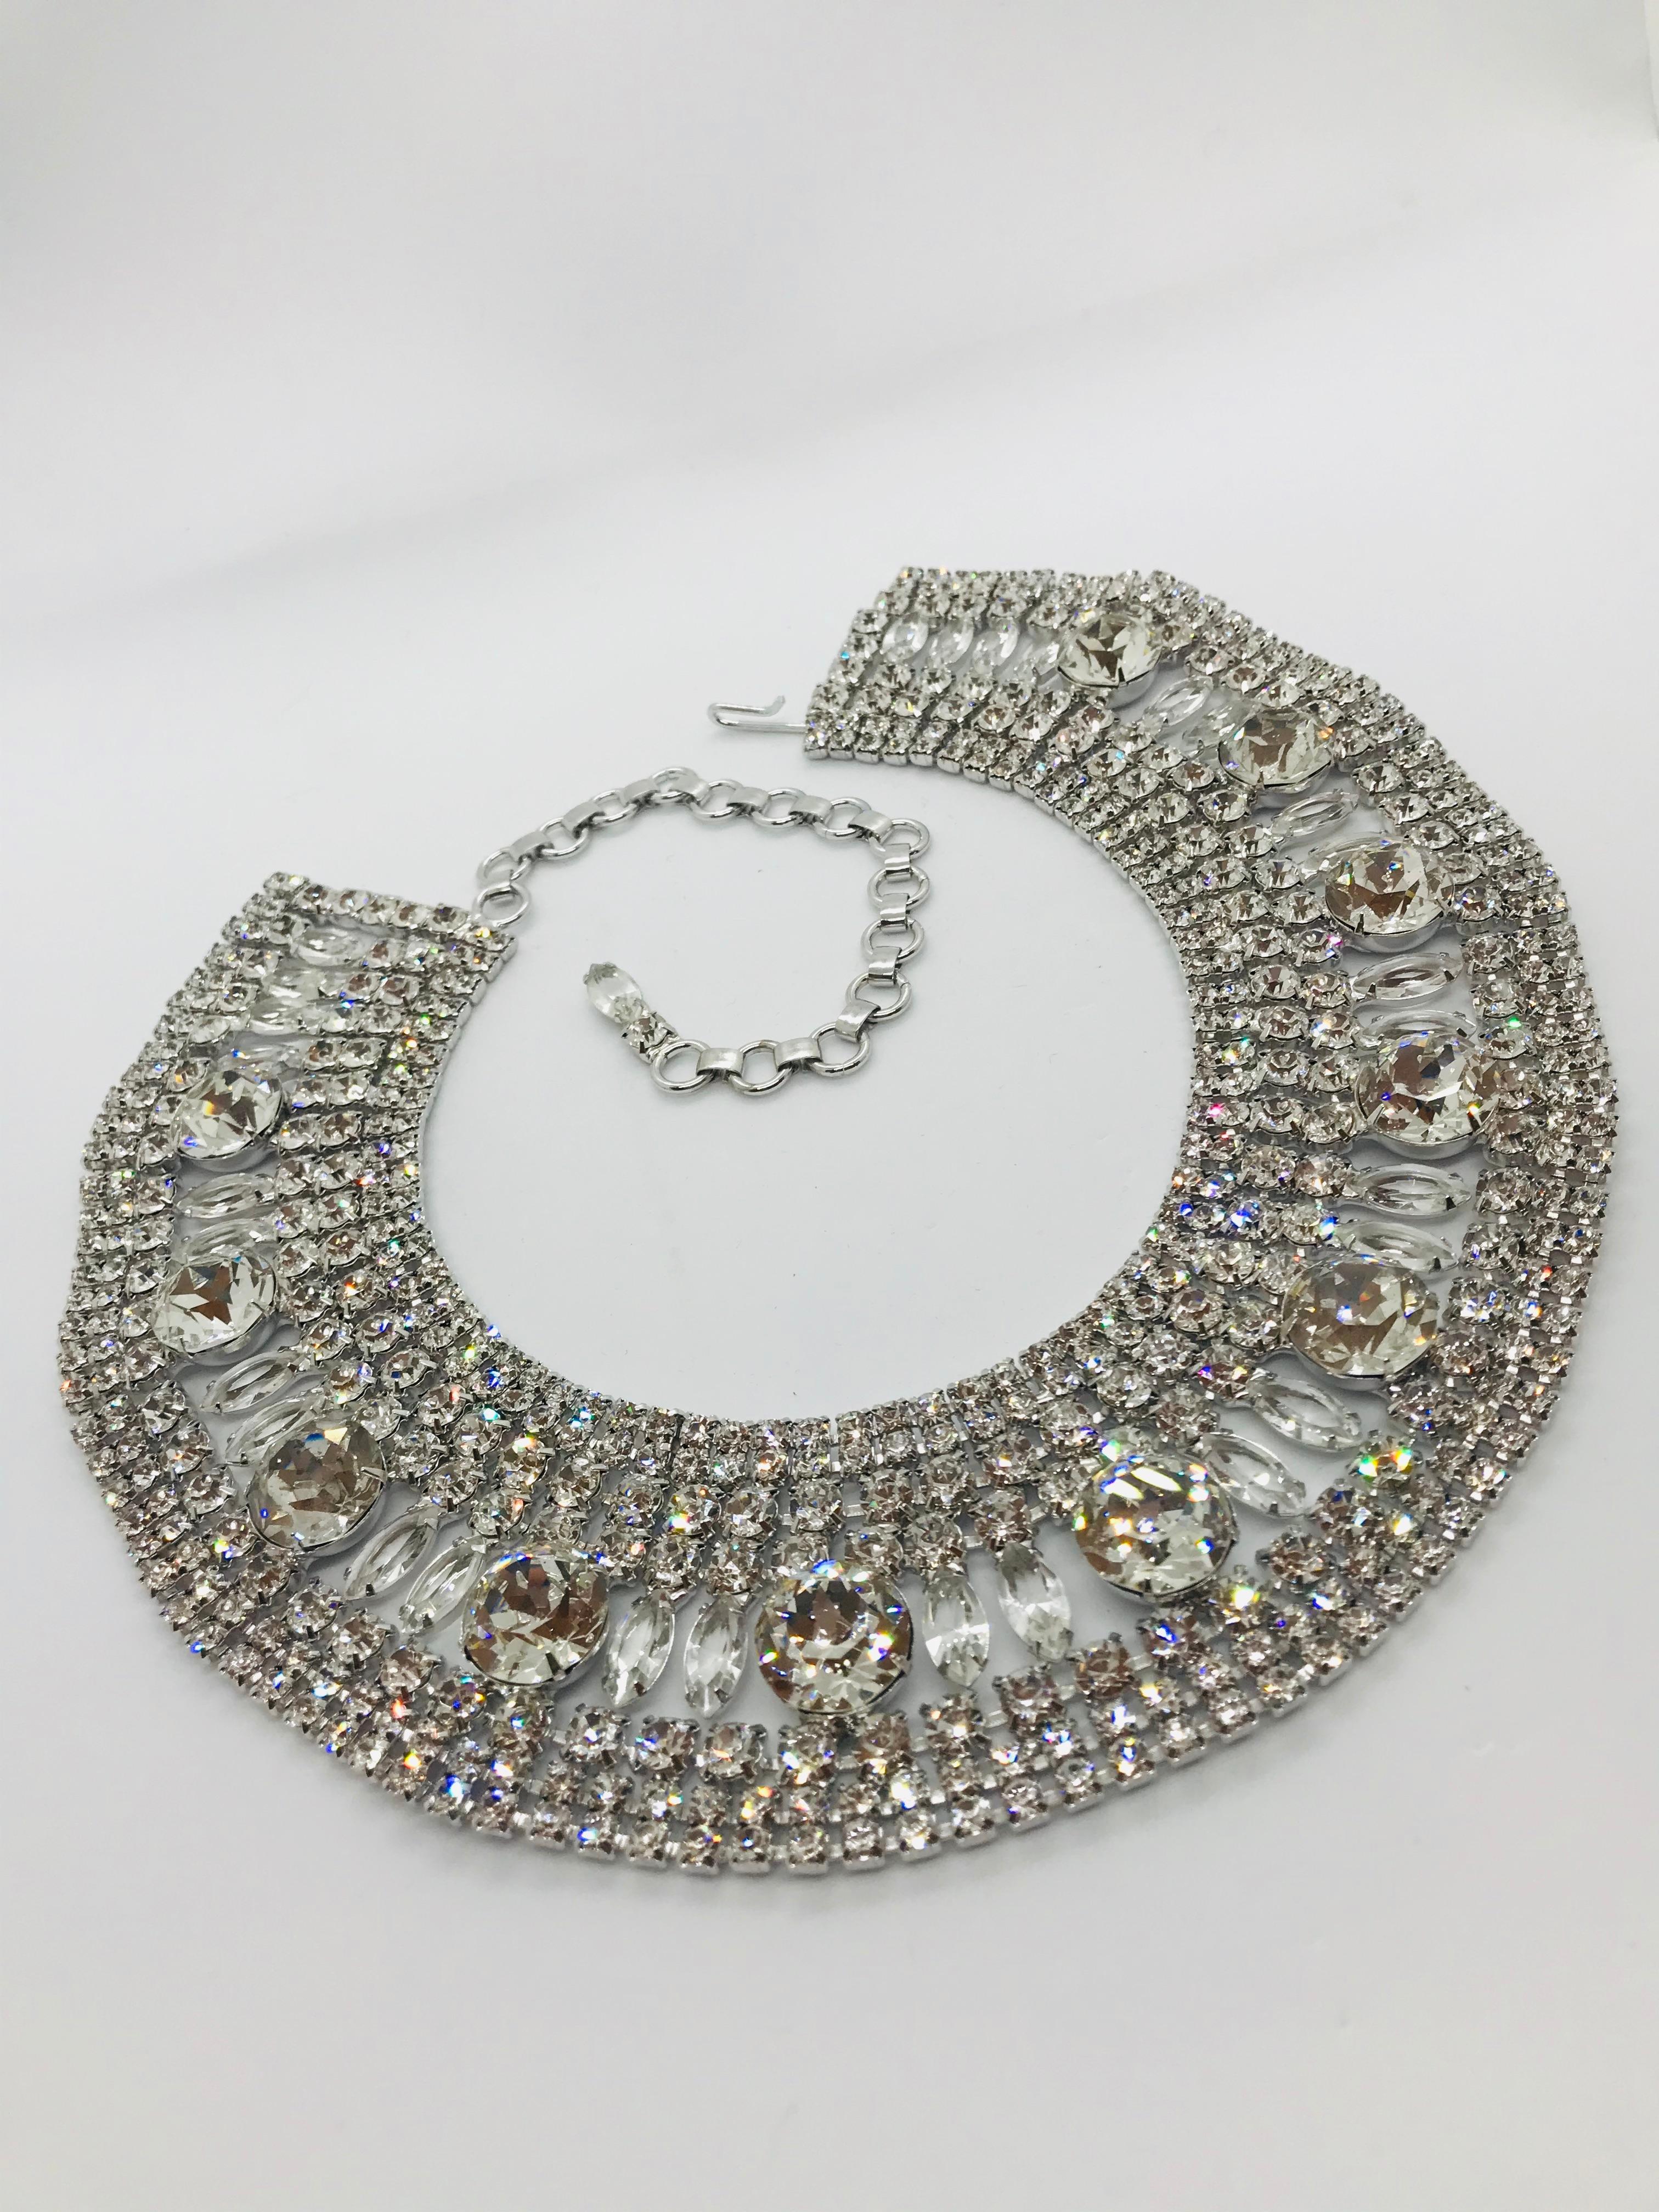 We consider a crystal collar necklace as 